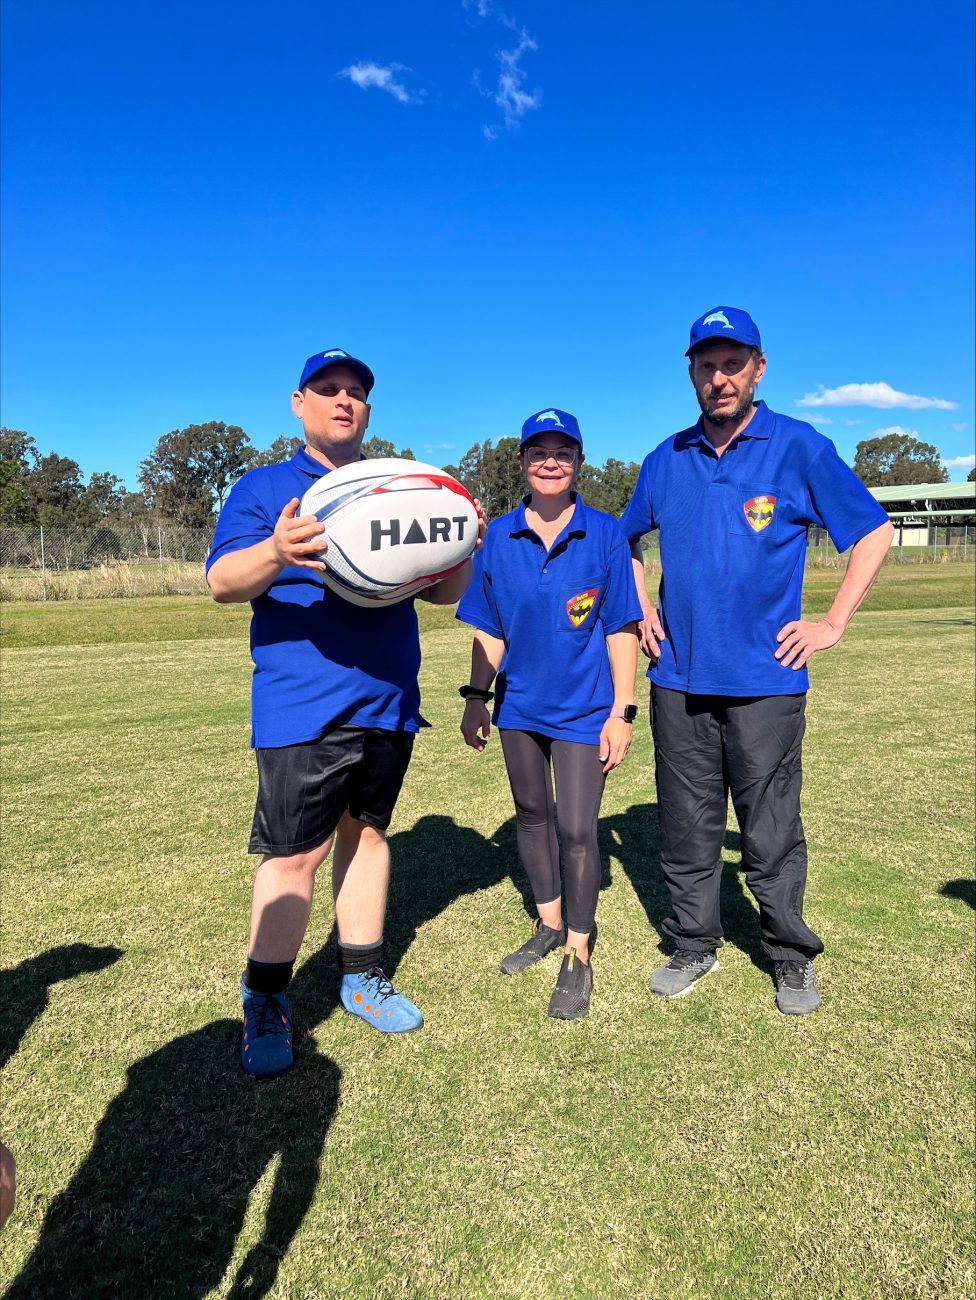 A photo of three Blue Dolphins Team members: Brendon (blind), Julie (very low vision), and Paul (full sight) with the very large ball used in Beep Tag. All proudly wearing their Blue uniforms.